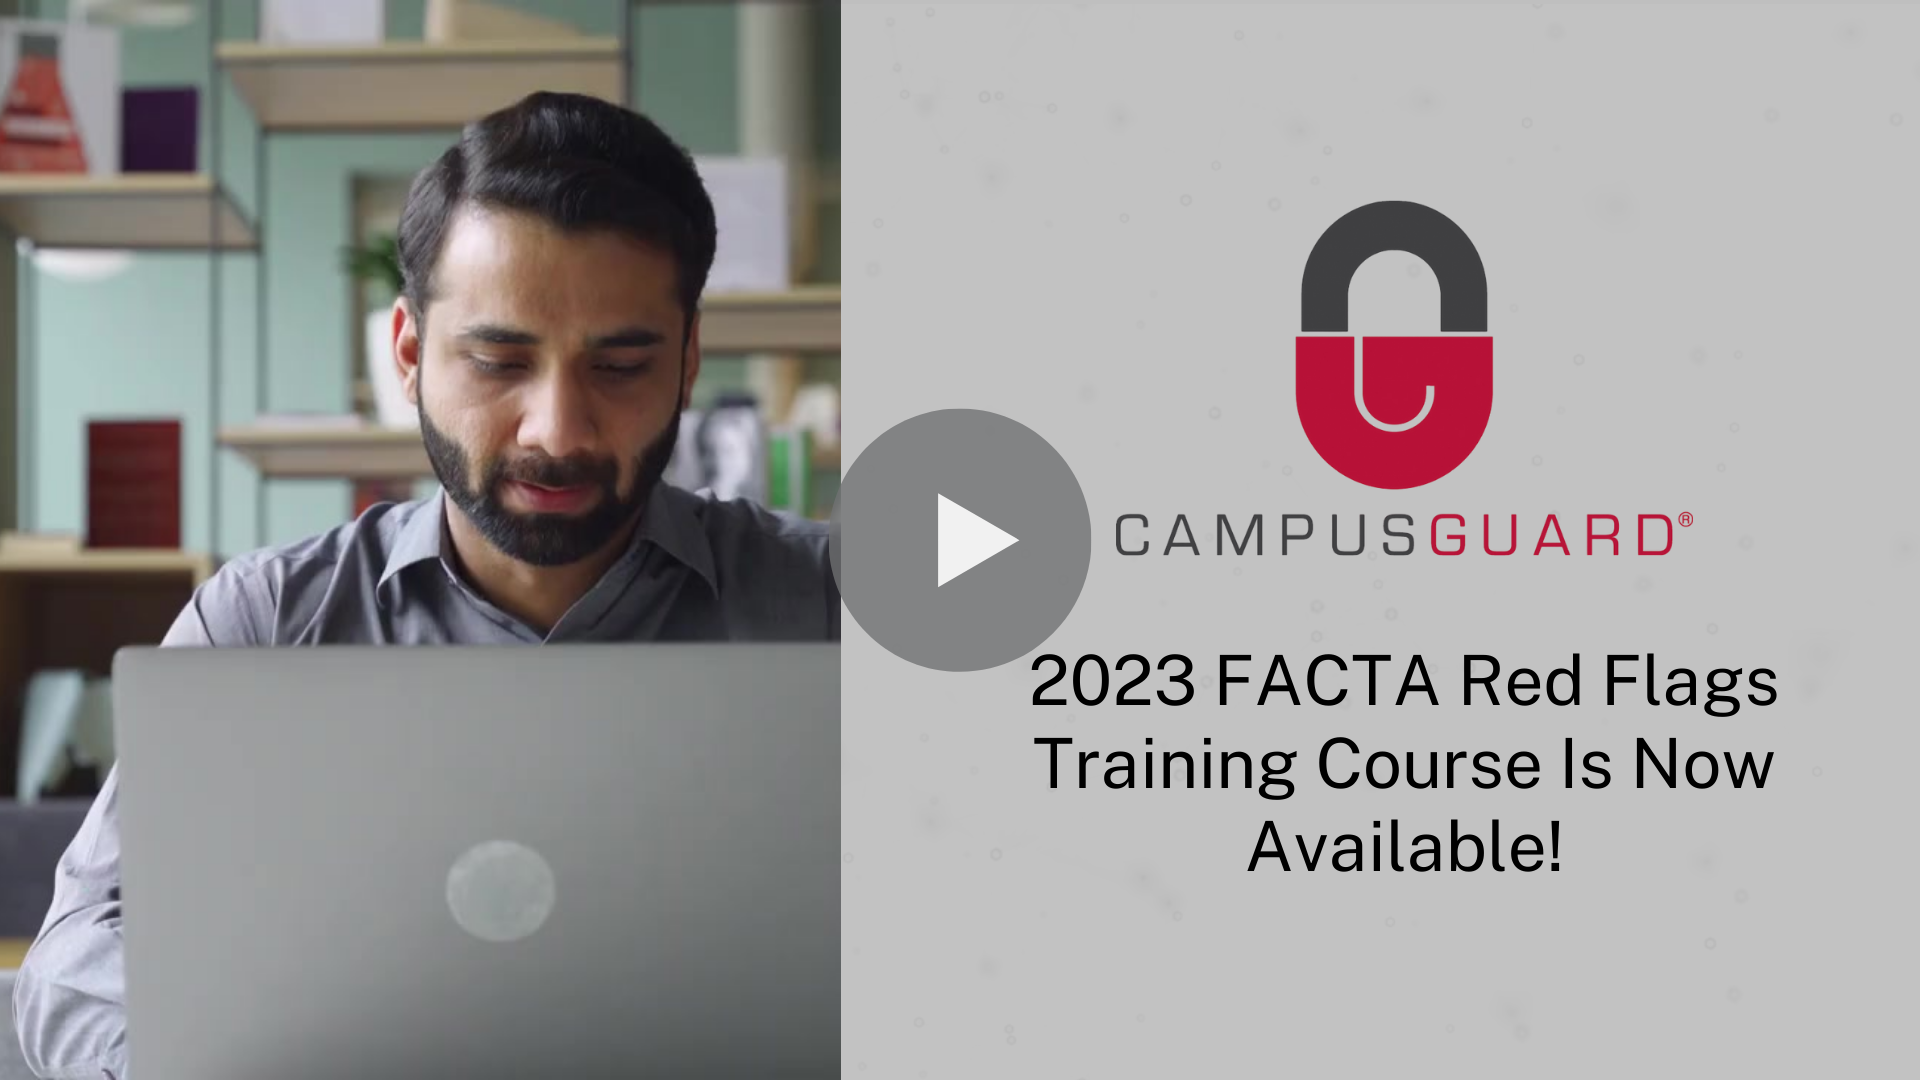 2023 FACTA Red Flags Training Course is Now Available!